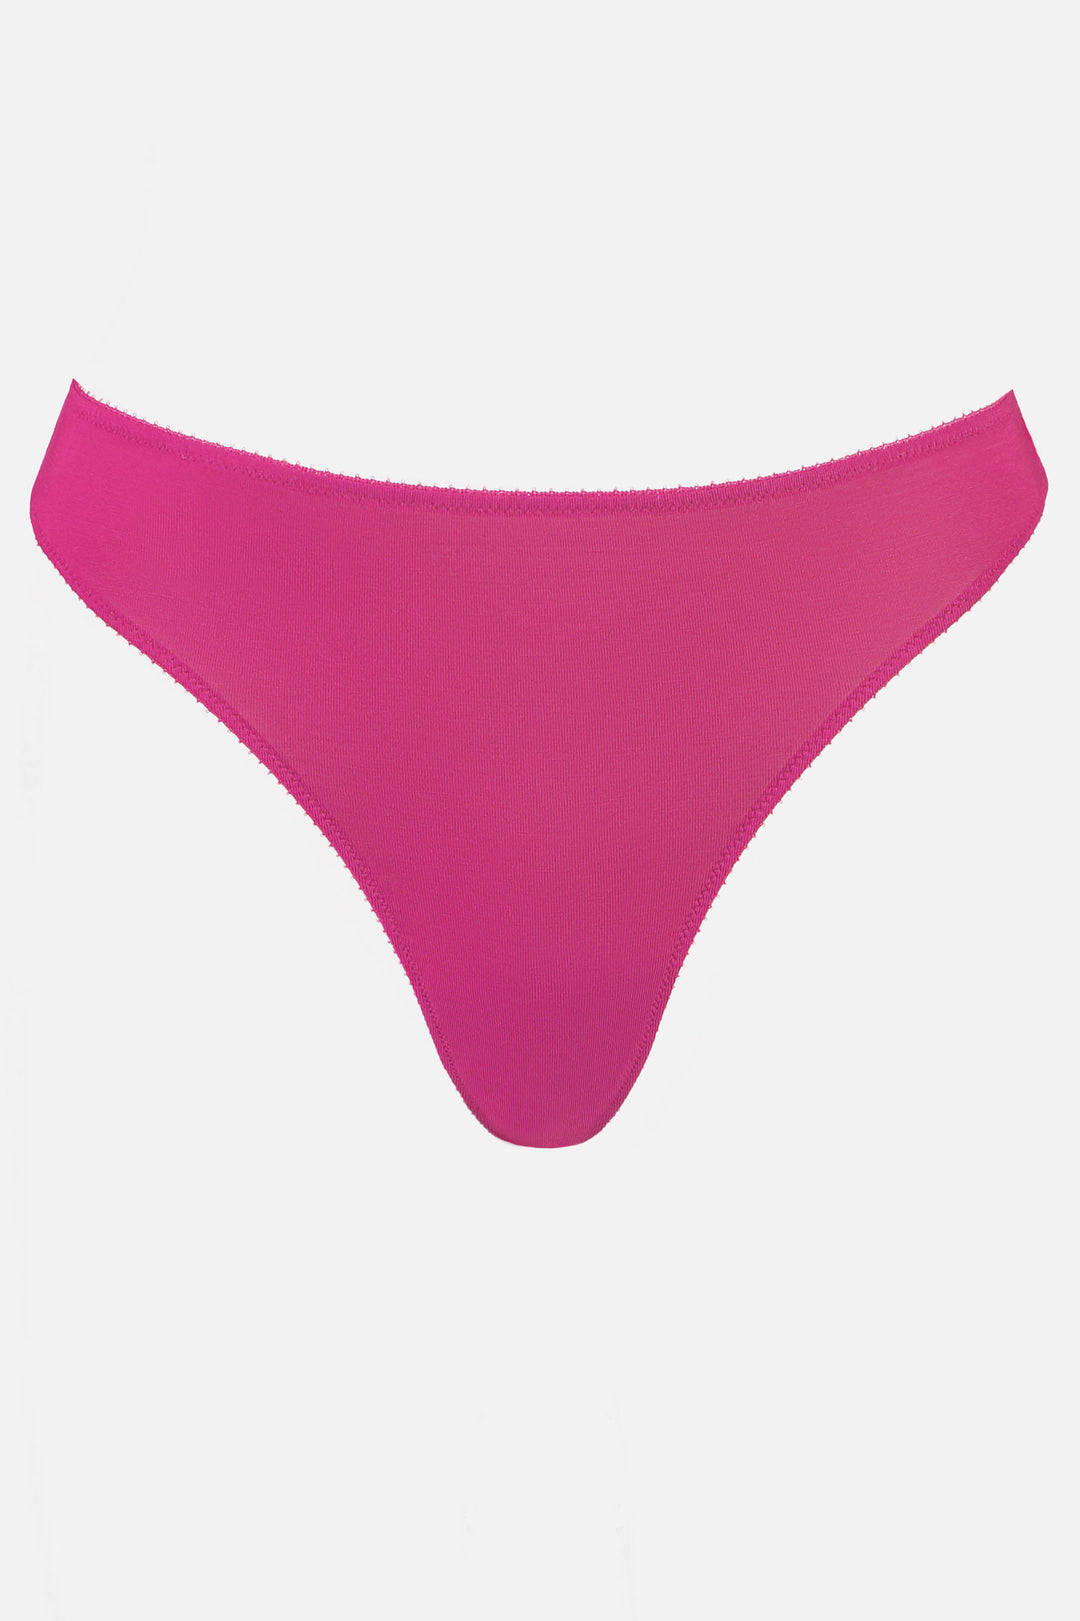 Videris Lingerie bikini knicker in magenta TENCEL™ a comfortable mid-rise style cut to follow the curve of your hips